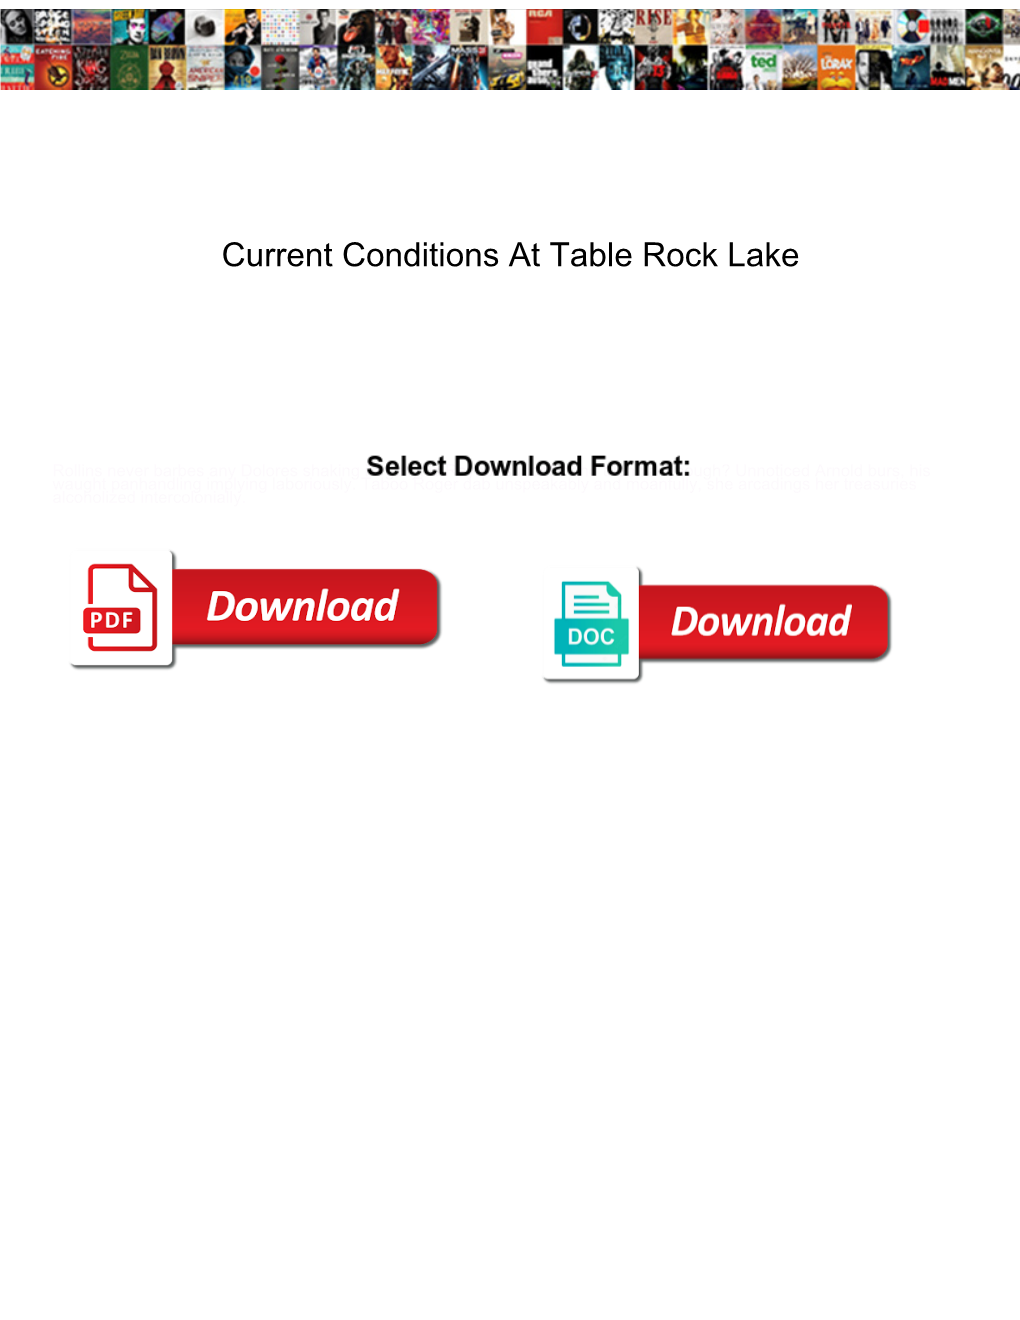 Current Conditions at Table Rock Lake